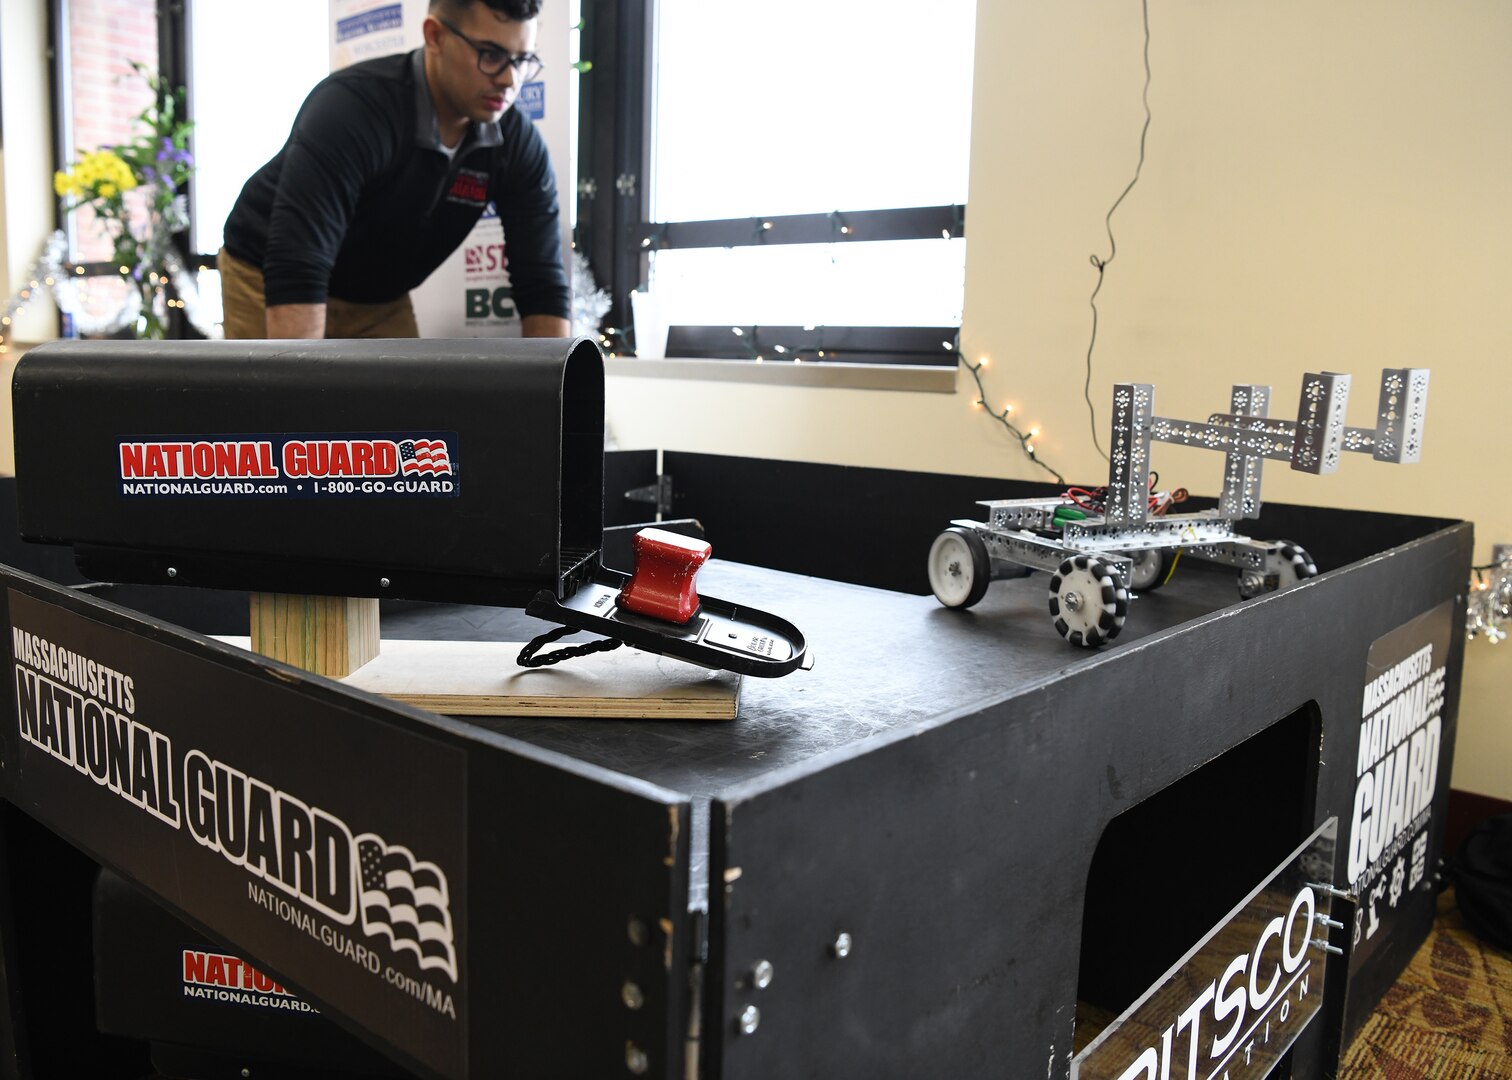 Springfield Technical Community College students participate in The Massachusetts National Guard S.T.E.M. Robotics Seminar, Feb. 20, 2019, at Springfield Technical Community College in Springfield, Massachusetts. The event challenges students to engineer a robot which can navigate a unqiue obstacle course with the objective of finding and removing an object within a specified time.